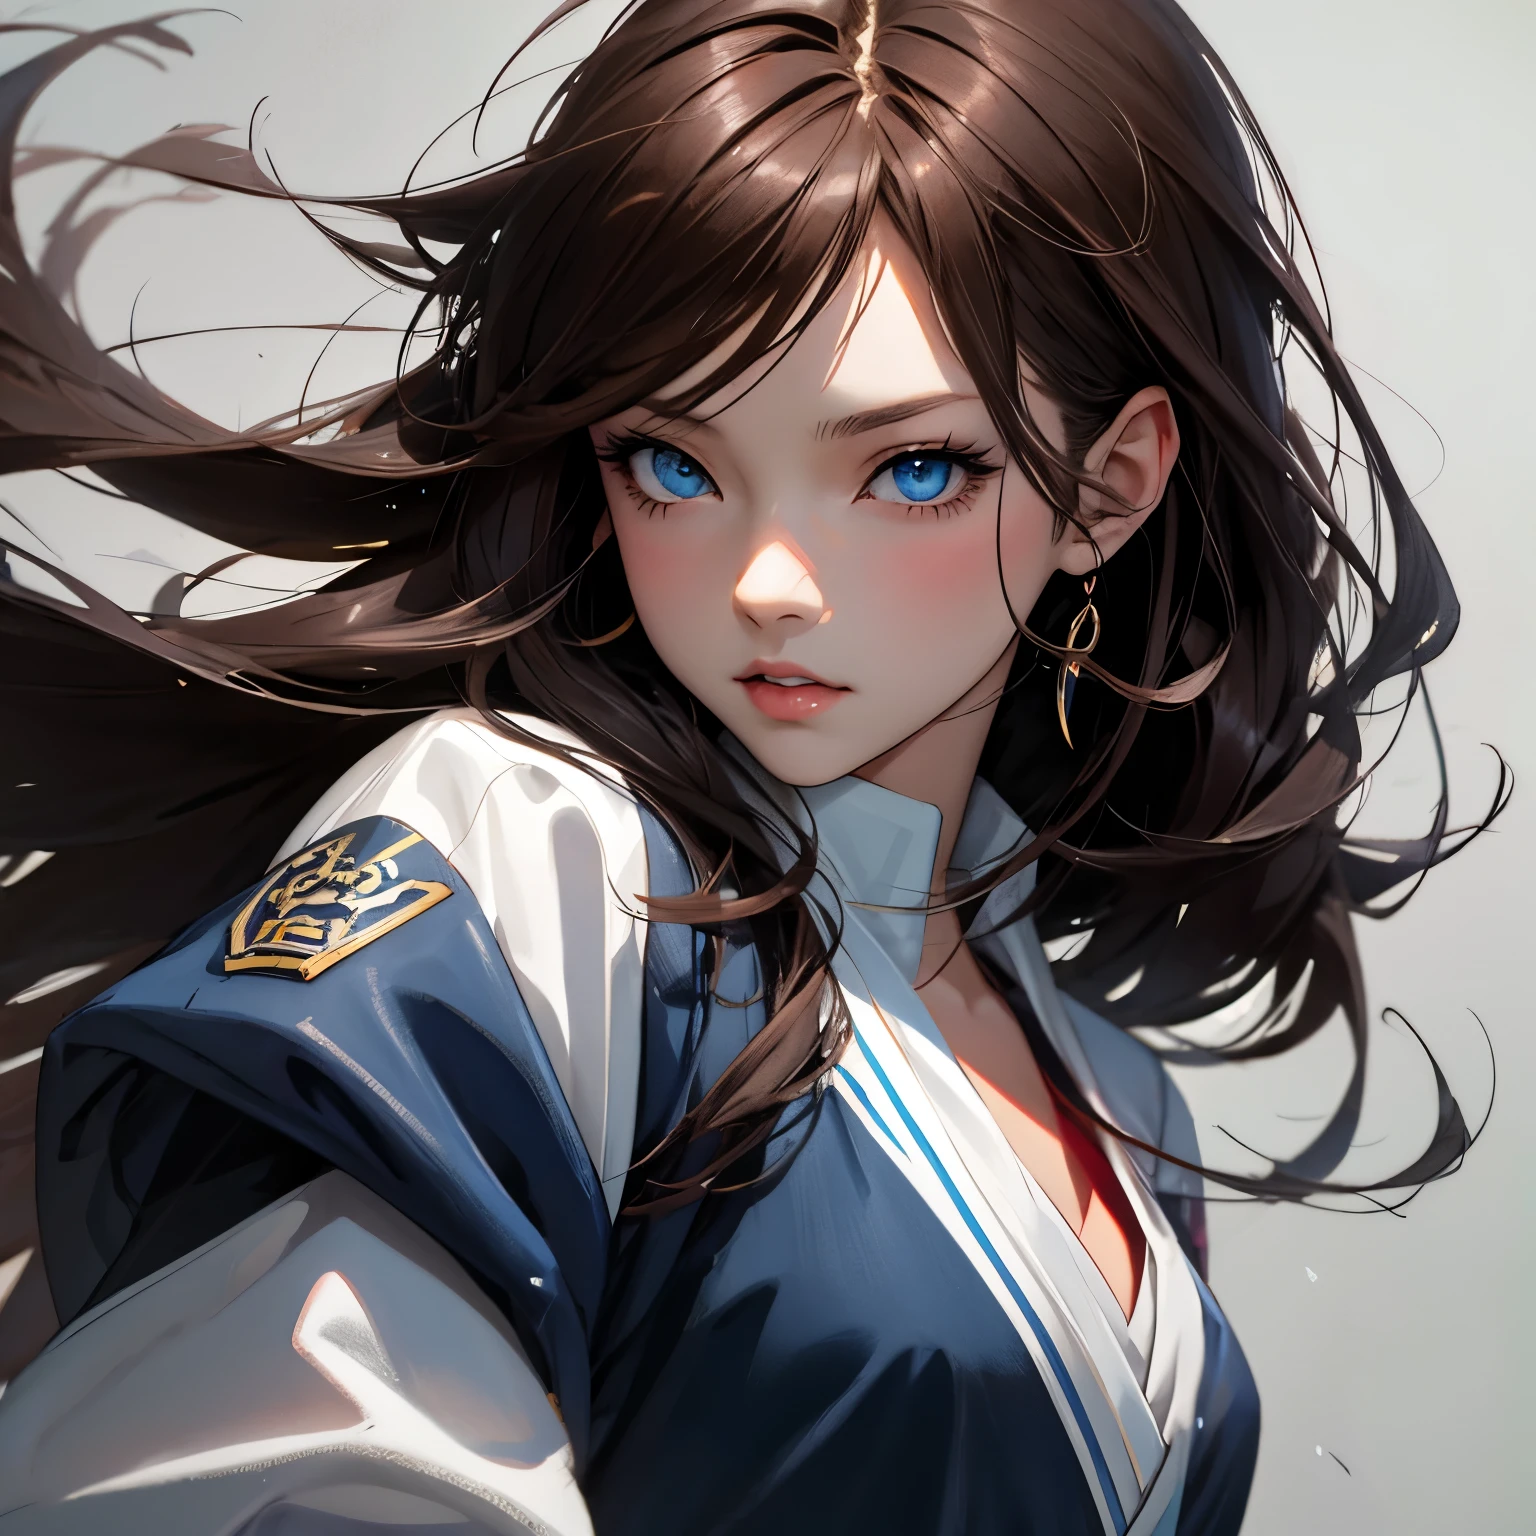 anime girl with brown hair and blue eyes and a highlight in her hair, anime art wallpaper 8 k, detailed digital anime art, anime style 4 k, anime art wallpaper 4k, anime art wallpaper 4 k, trending on artstation pixiv, digital art on pixiv, 8k high quality detailed art, best anime 4k konachan wallpaper
